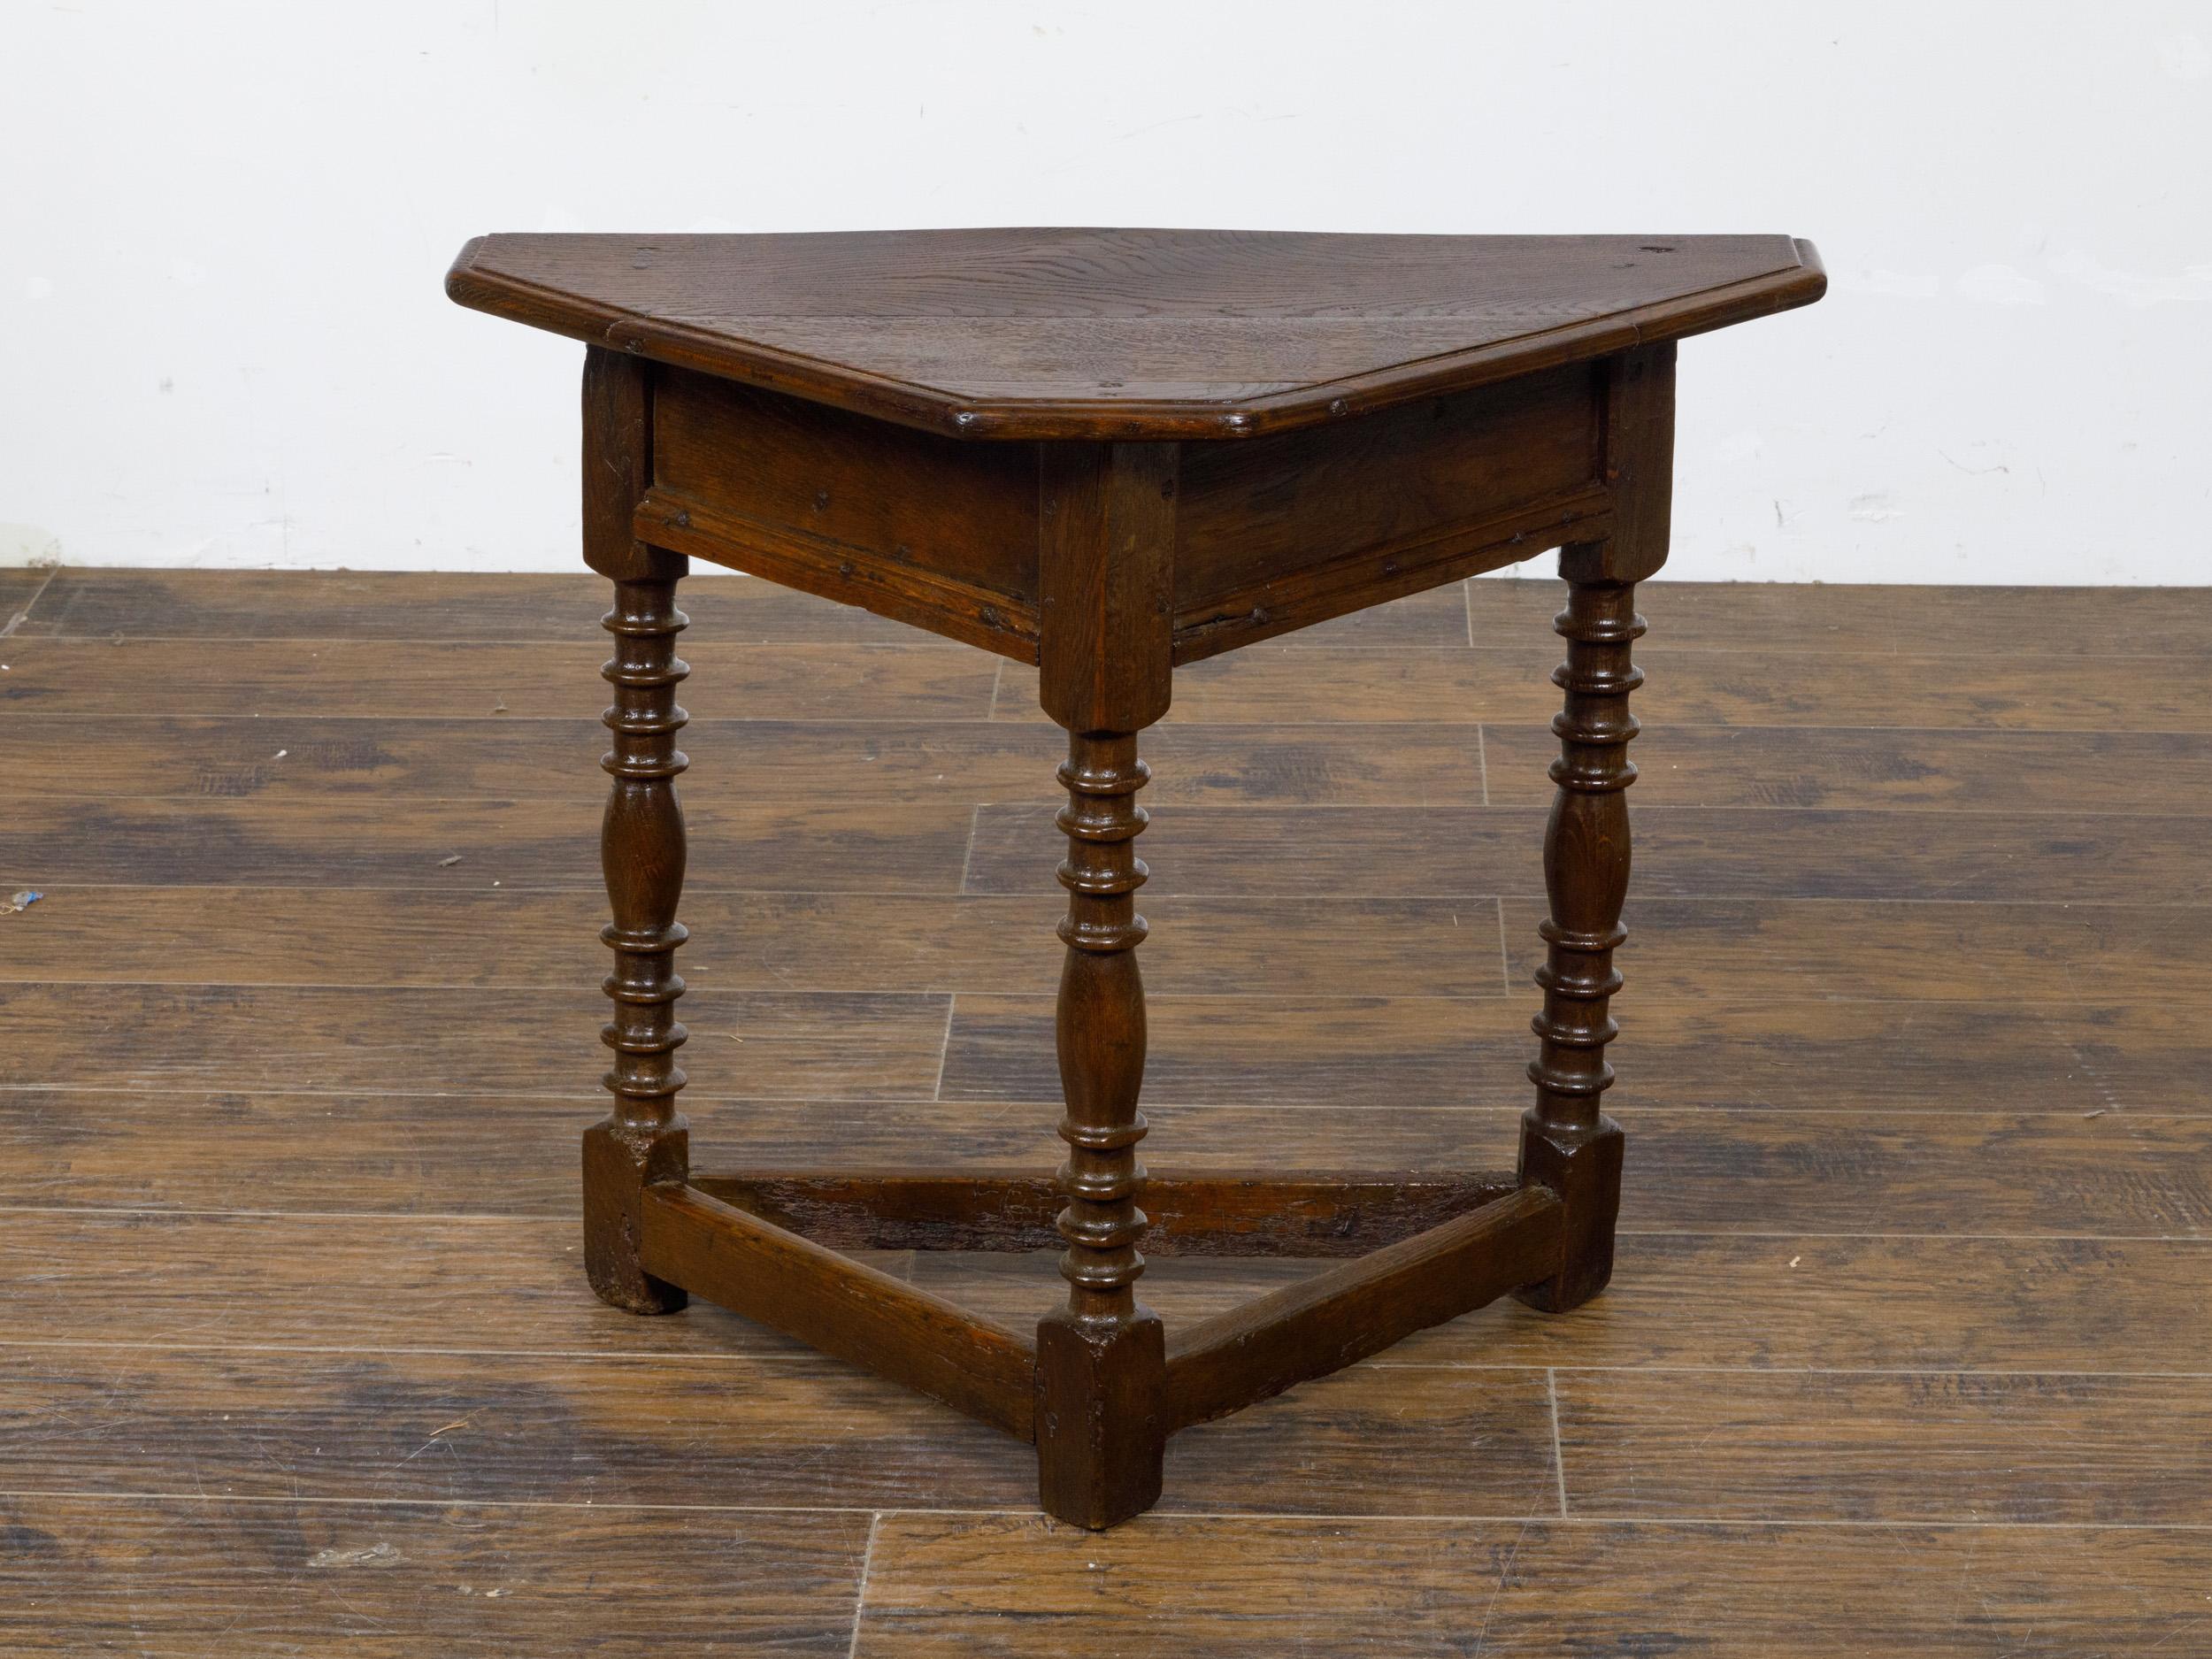 An English triangular shaped oak demi-lune table from the 19th century with turned legs and plain side stretchers. This English demi-lune table, crafted from dark oak, features a triangular-shaped top with a flat frontal section, supported by